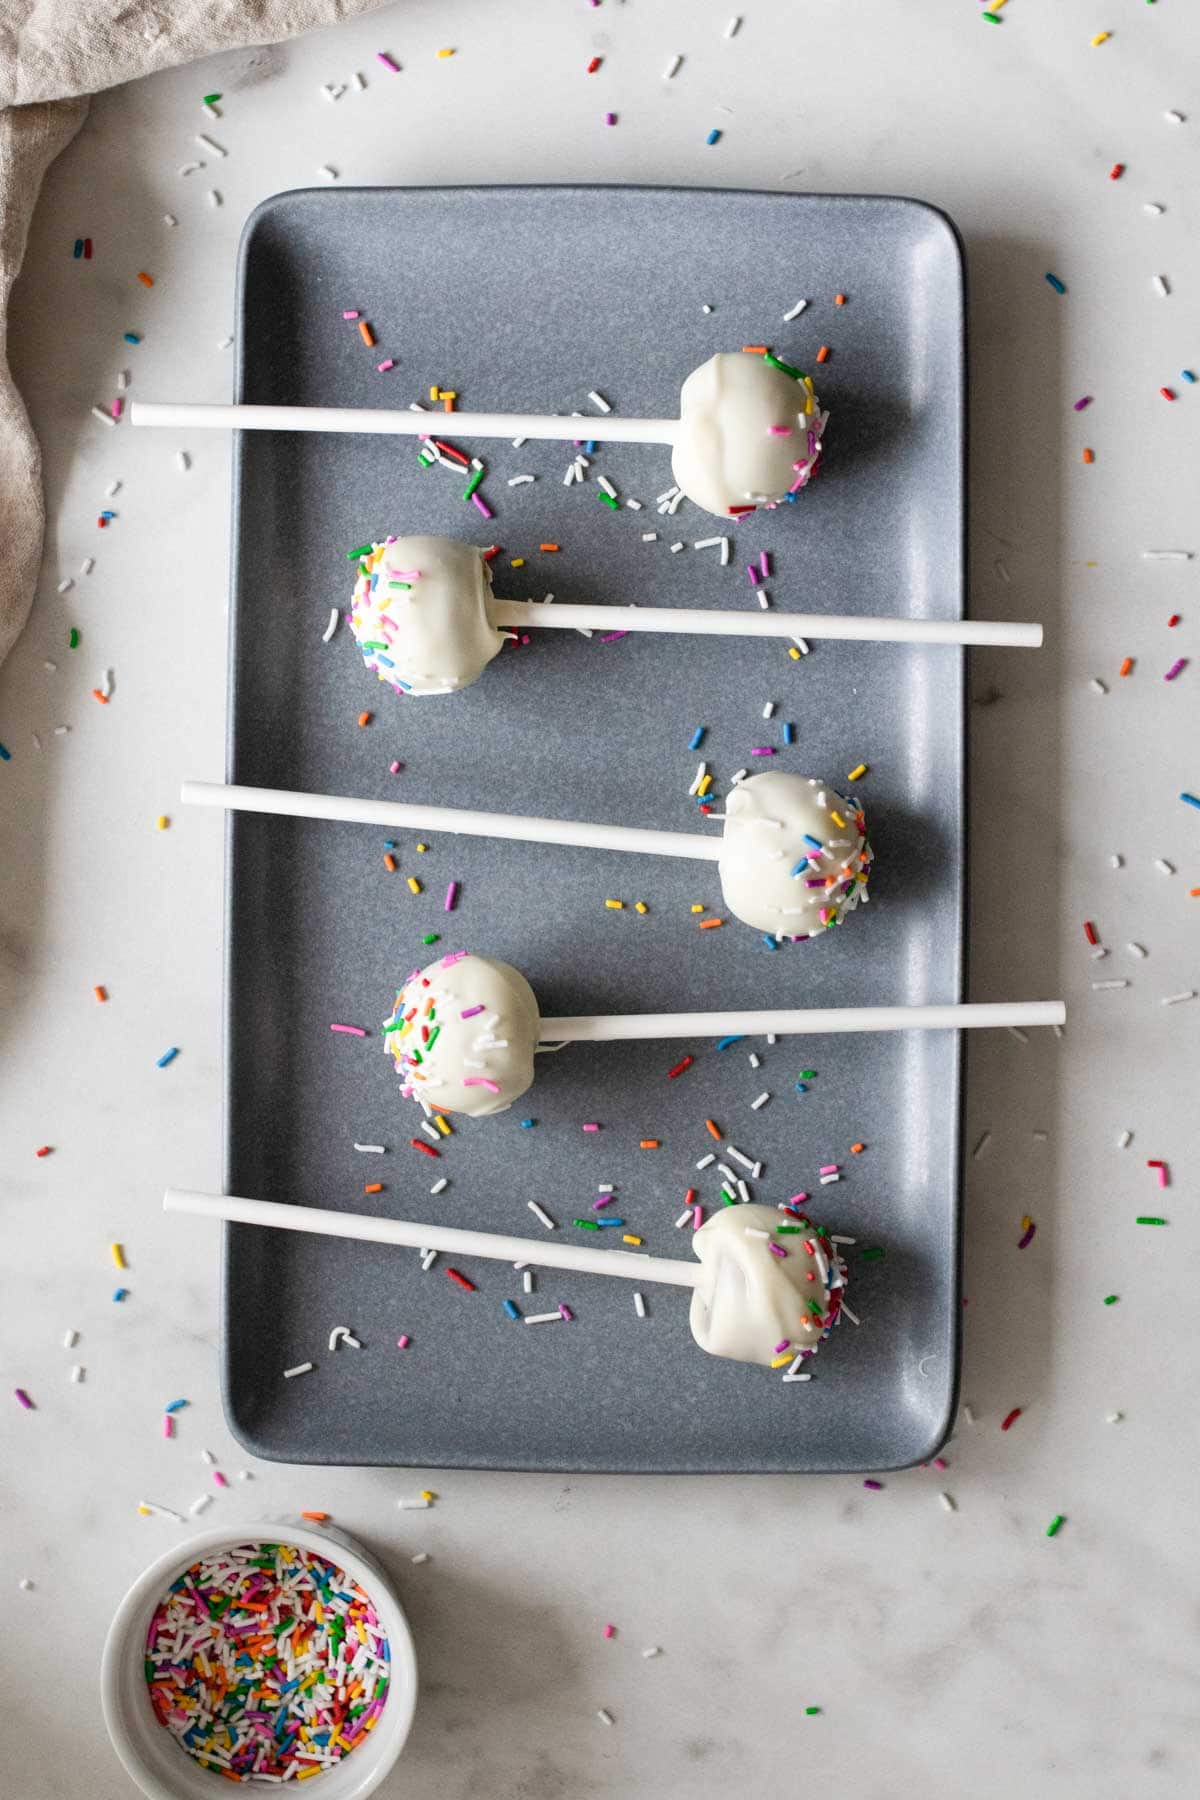 Cake pops letting the white chocolate cool and harden on a sheet pan.